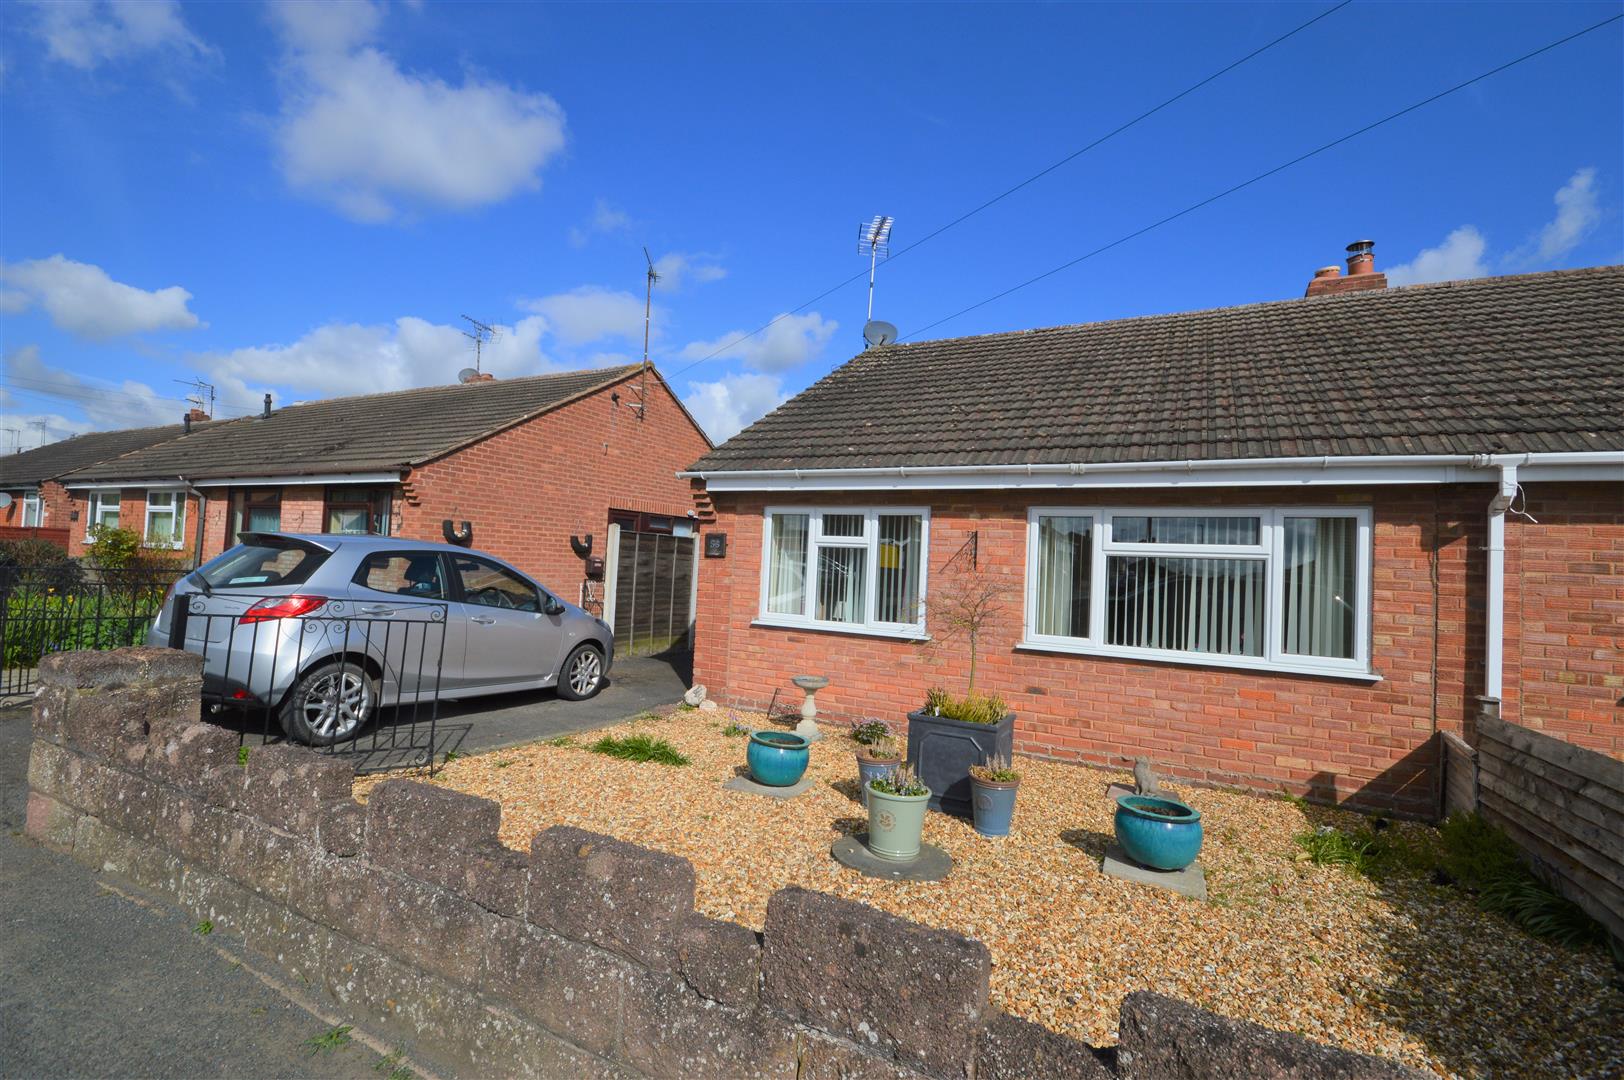 2 bed semi-detached bungalow for sale in Leominster, HR6